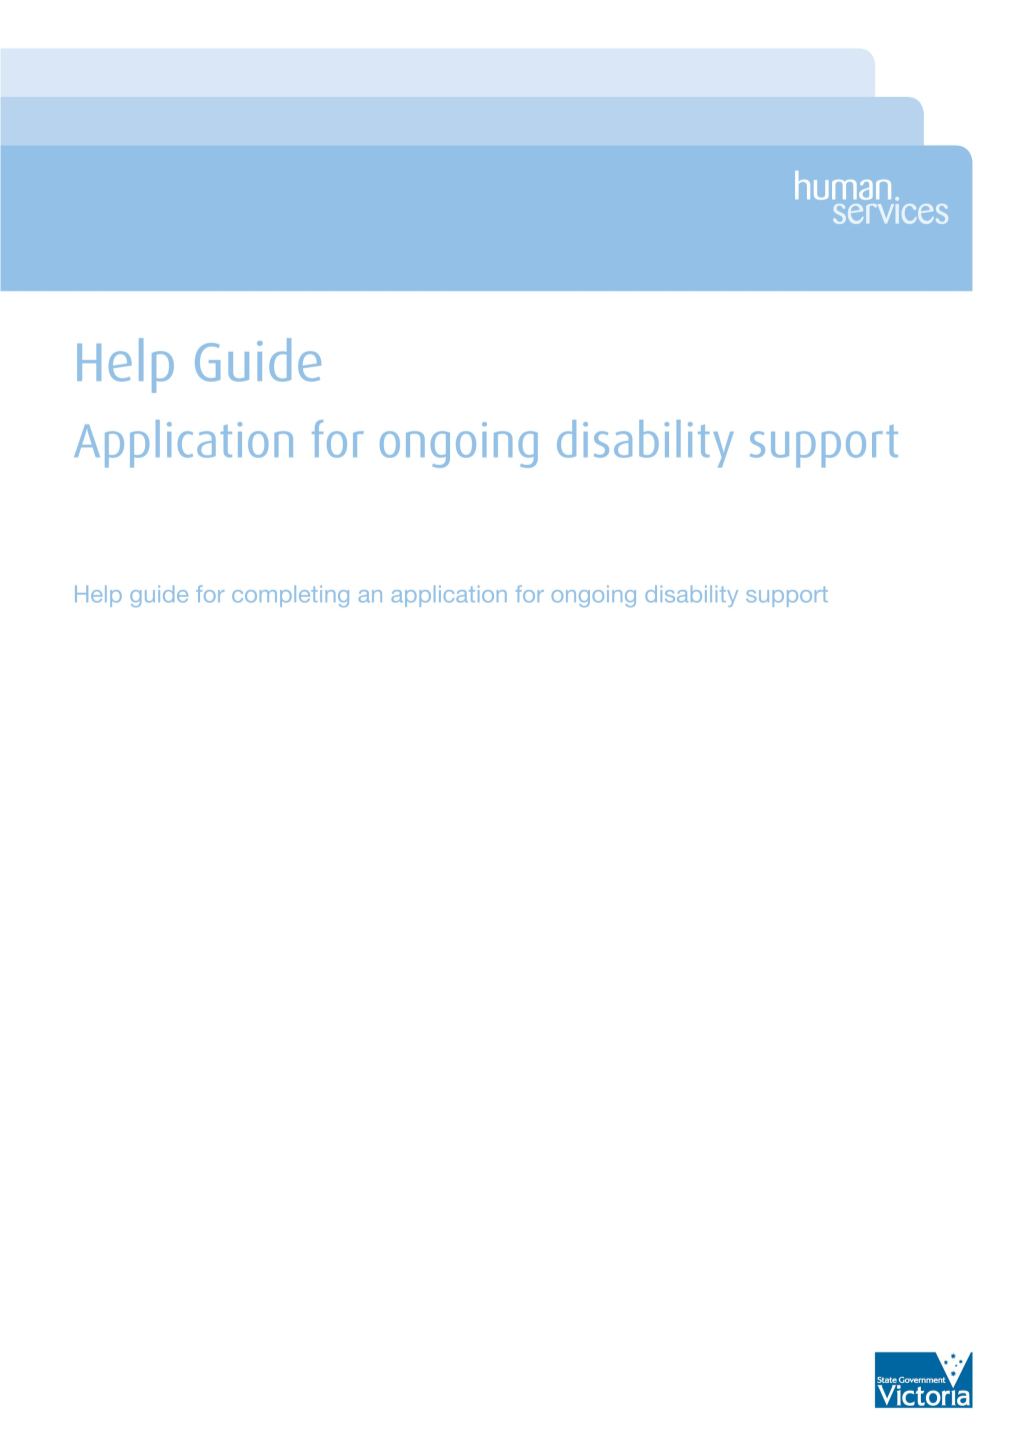 Help Guide for Appliction for Ongoing Disability Support